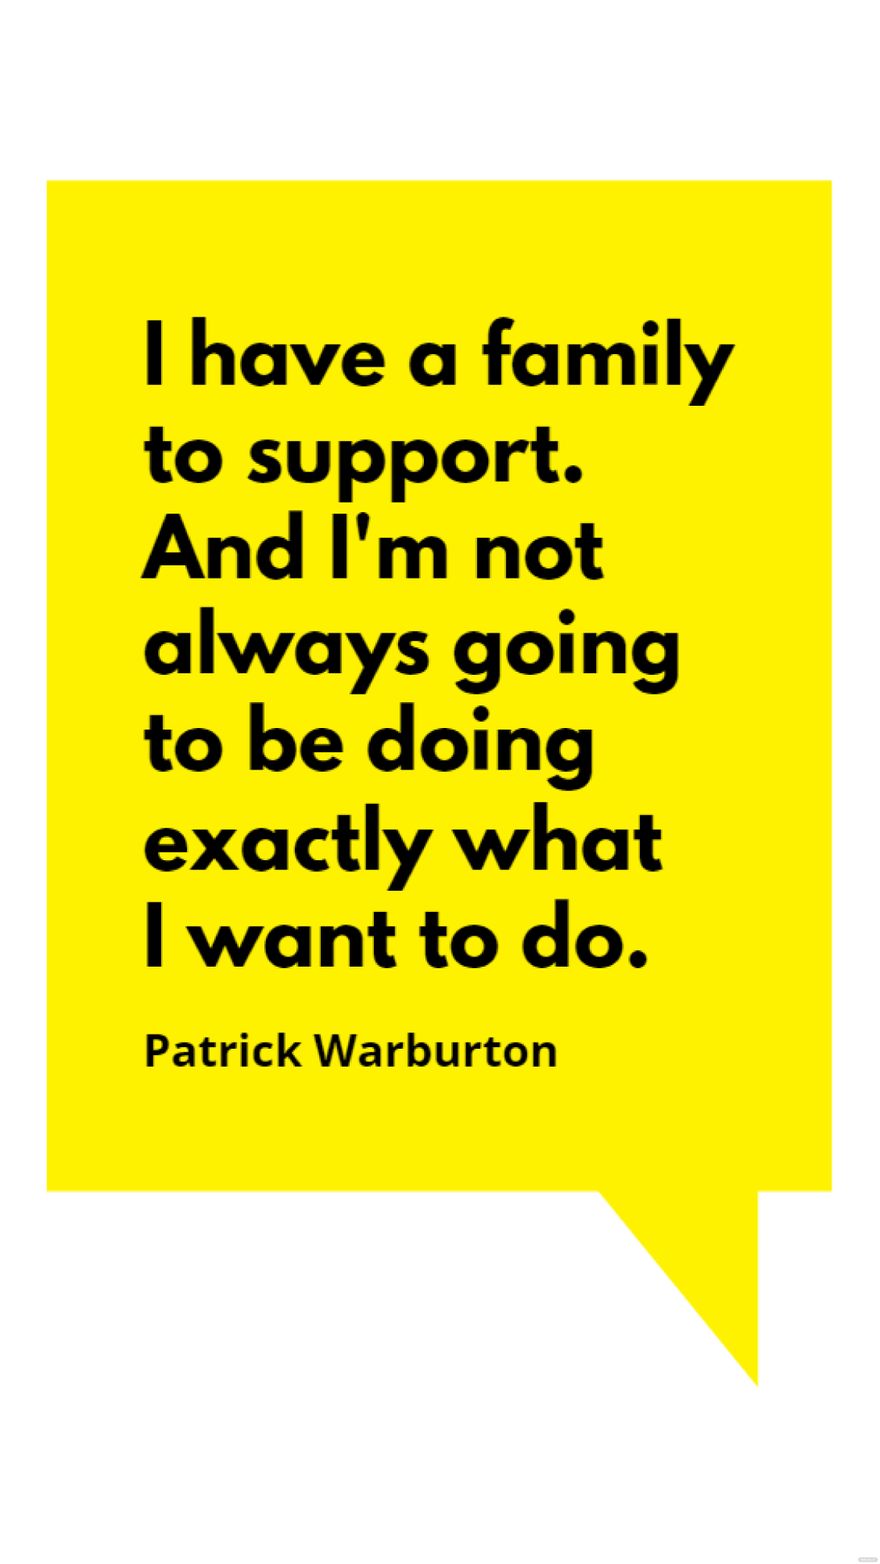 Free Patrick Warburton - I have a family to support. And I'm not always going to be doing exactly what I want to do. in JPG